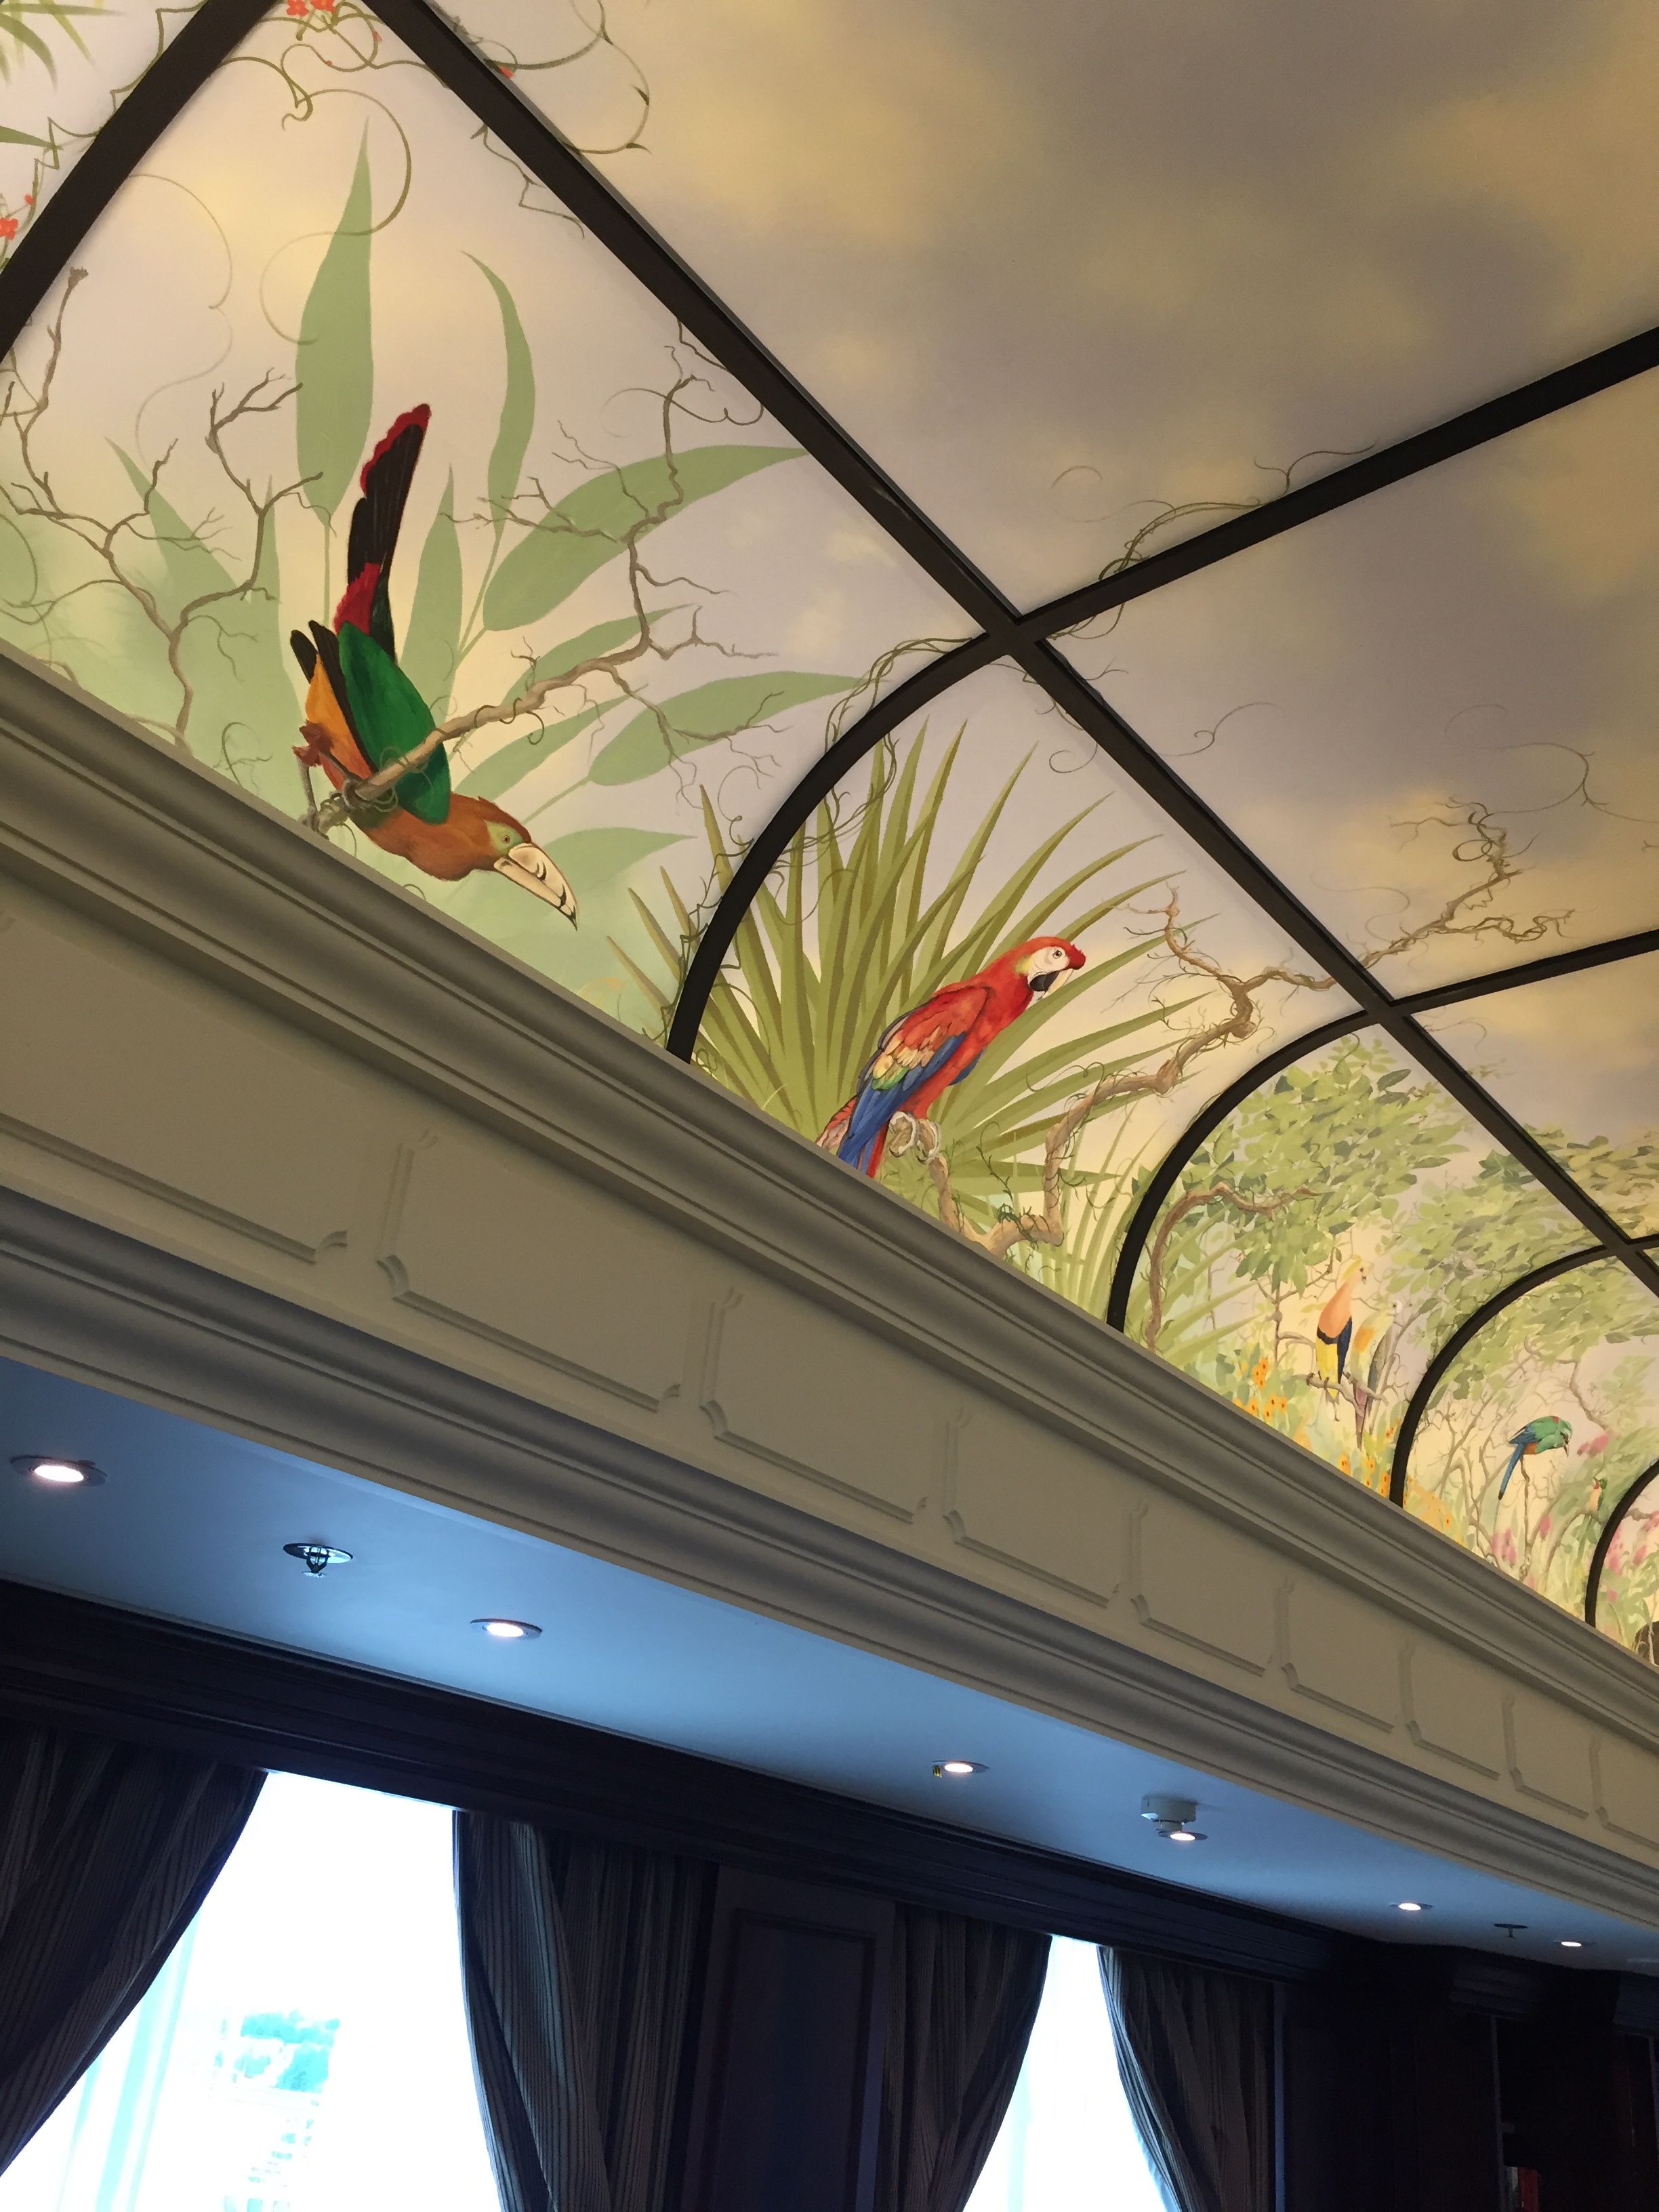 a ceiling with birds and plants painted on it